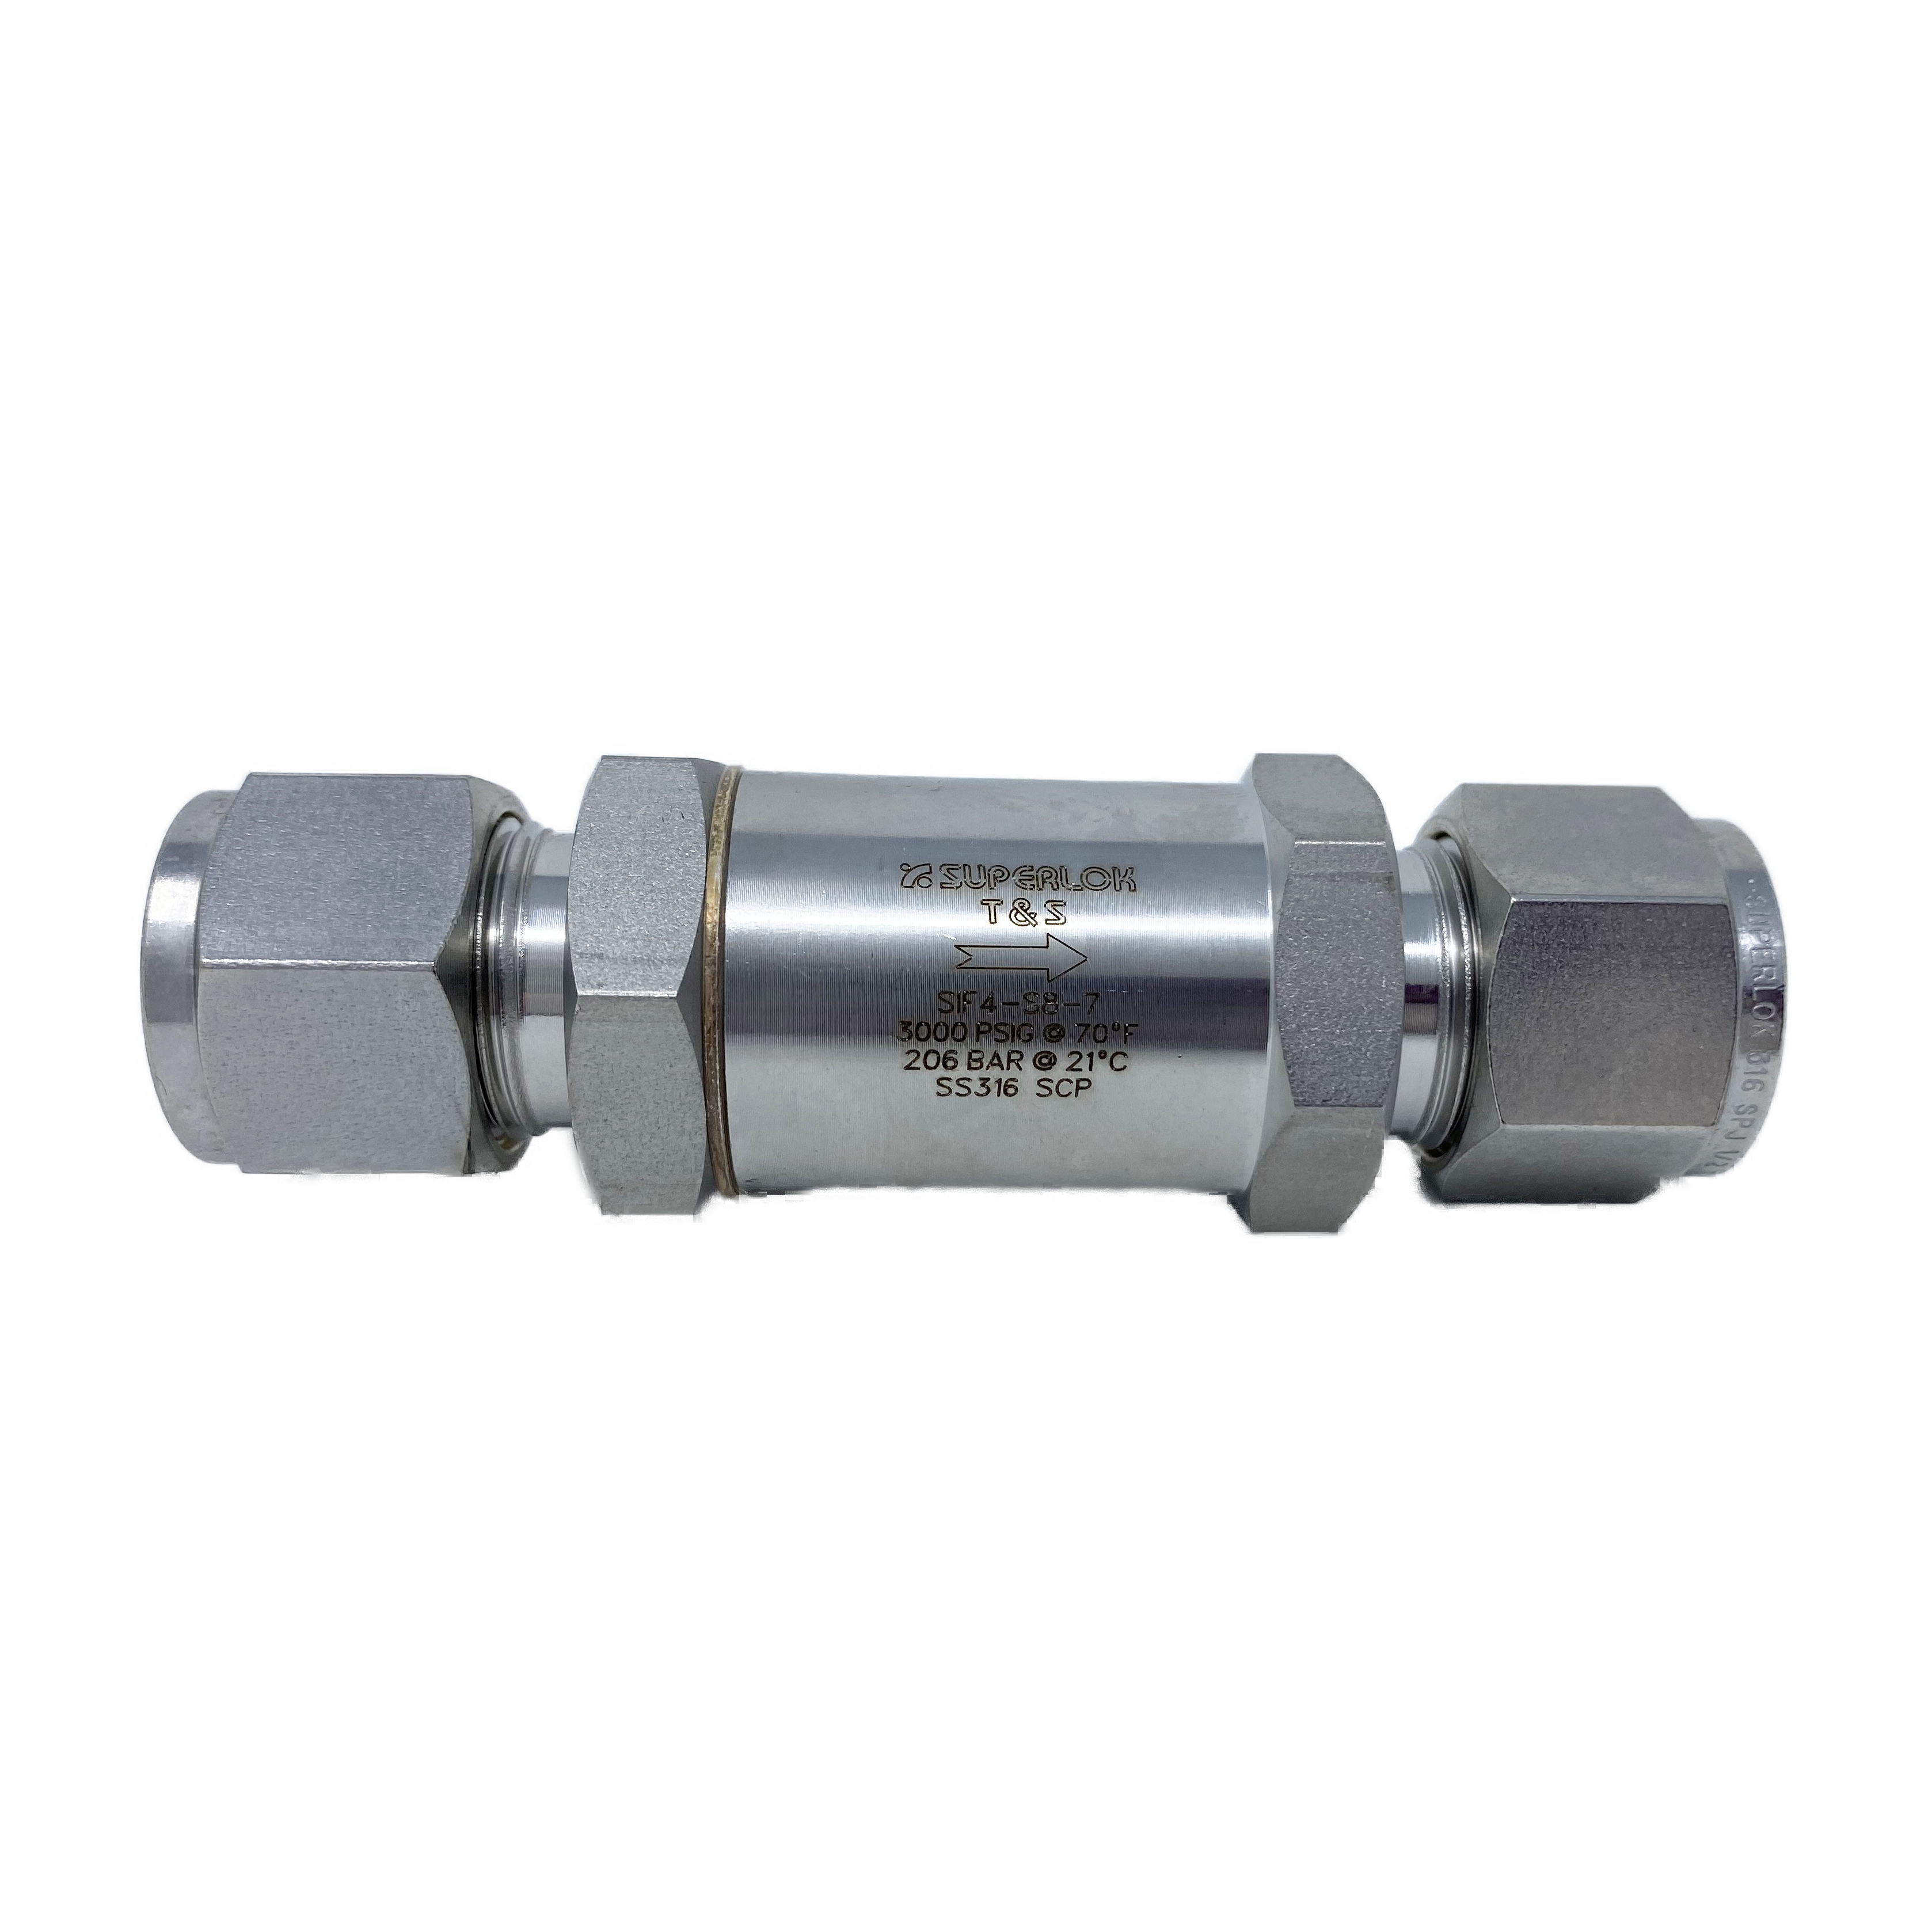 SIF4S8-2-S316 : SIF4S8-2-S316 : Superlok Inline Filter, 0.5 (1/2") Tube Connection, 2-Micron, 2500psi, 316SS